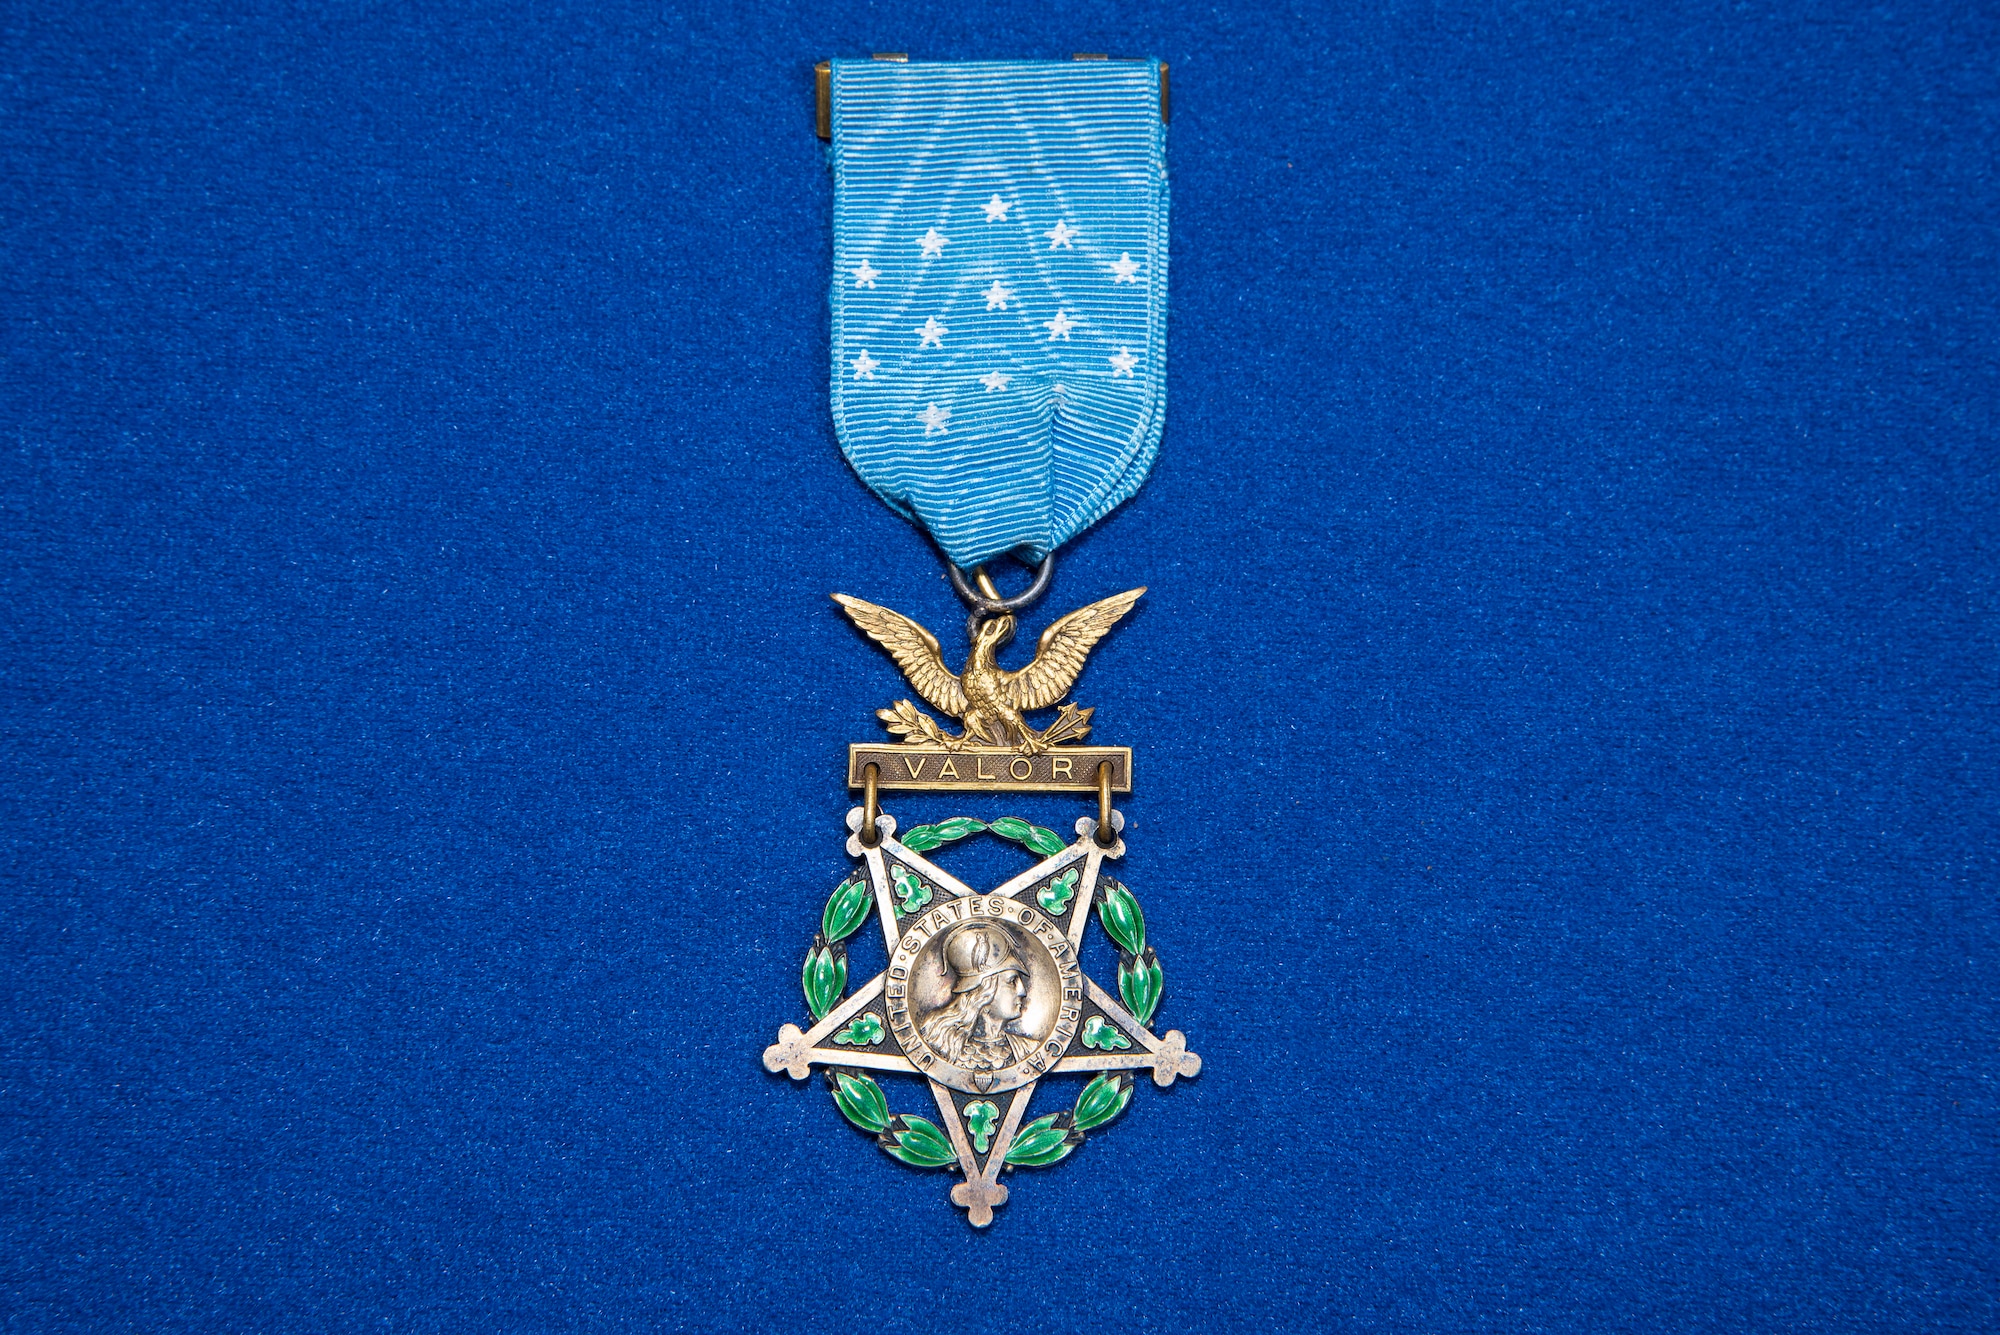 WWI observer Lt. Erwin R. Bleckley Medal of Honor on display in the Early Years Gallery at the National Museum of the U.S. Air Force. (U.S. Air Force photo by Ken LaRock)